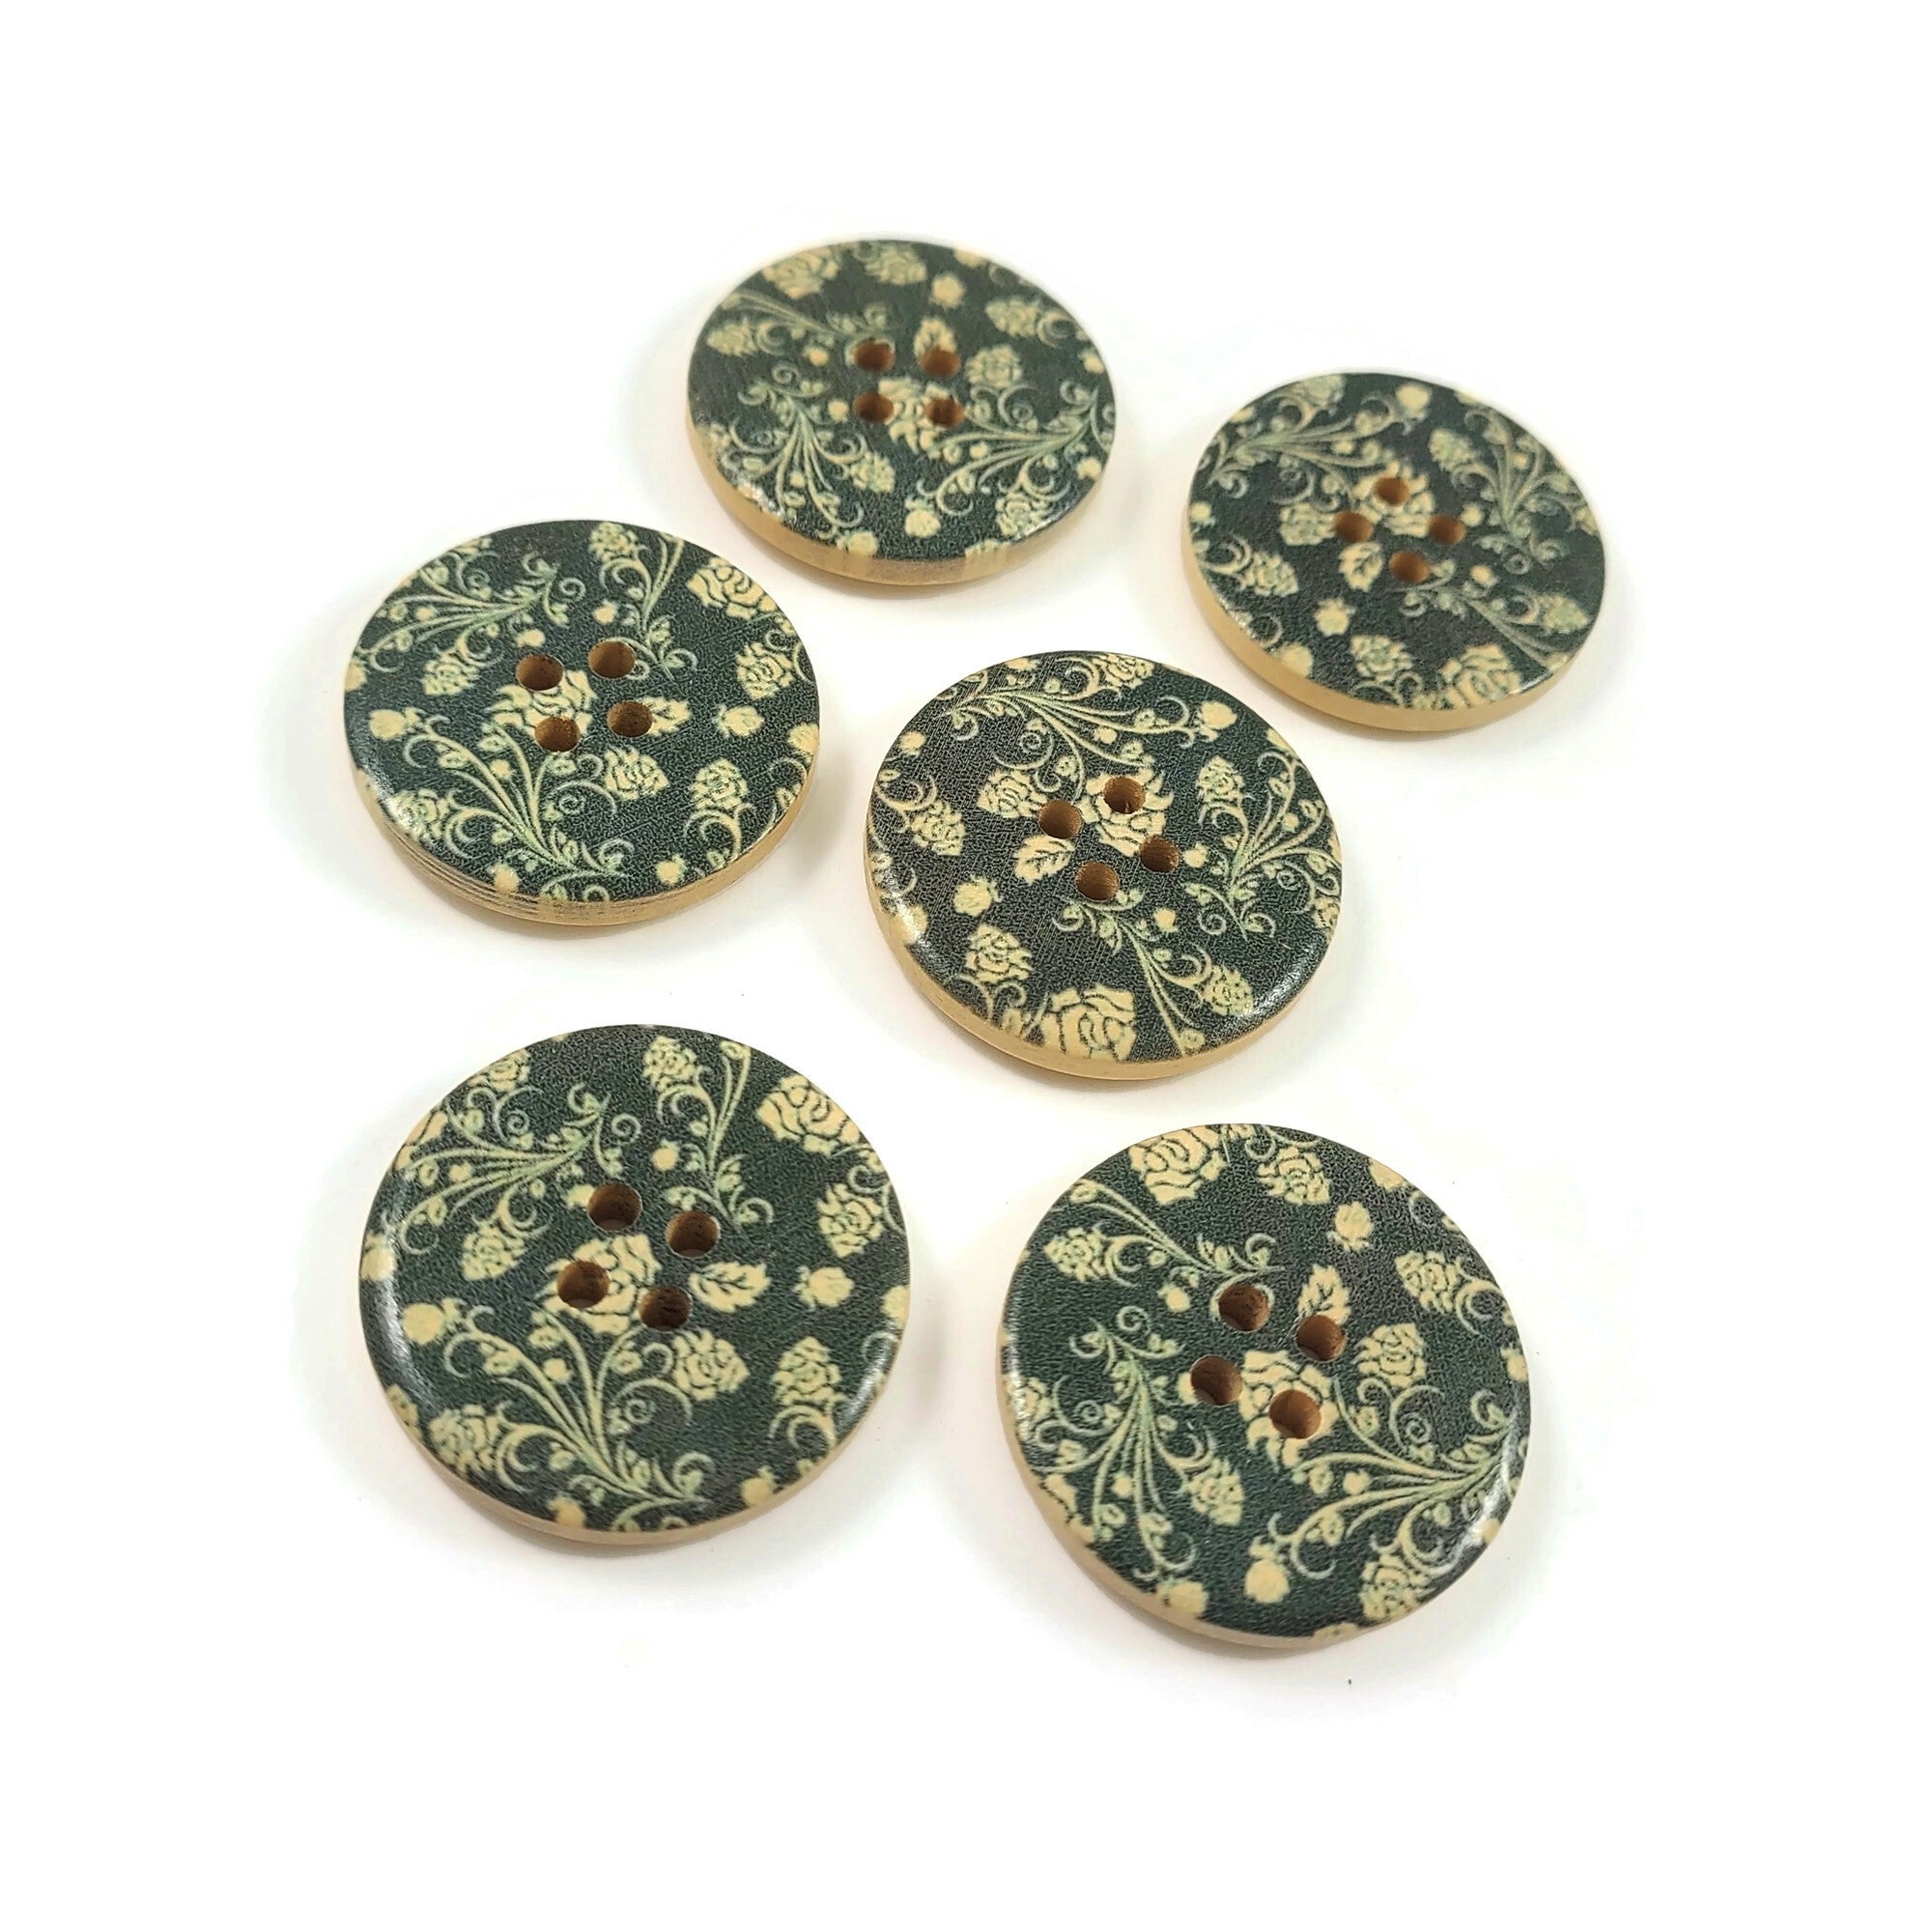 Black and Grey Flower Pattern Wooden Painting Buttons 3cm - Natural wood flowers color set of 6